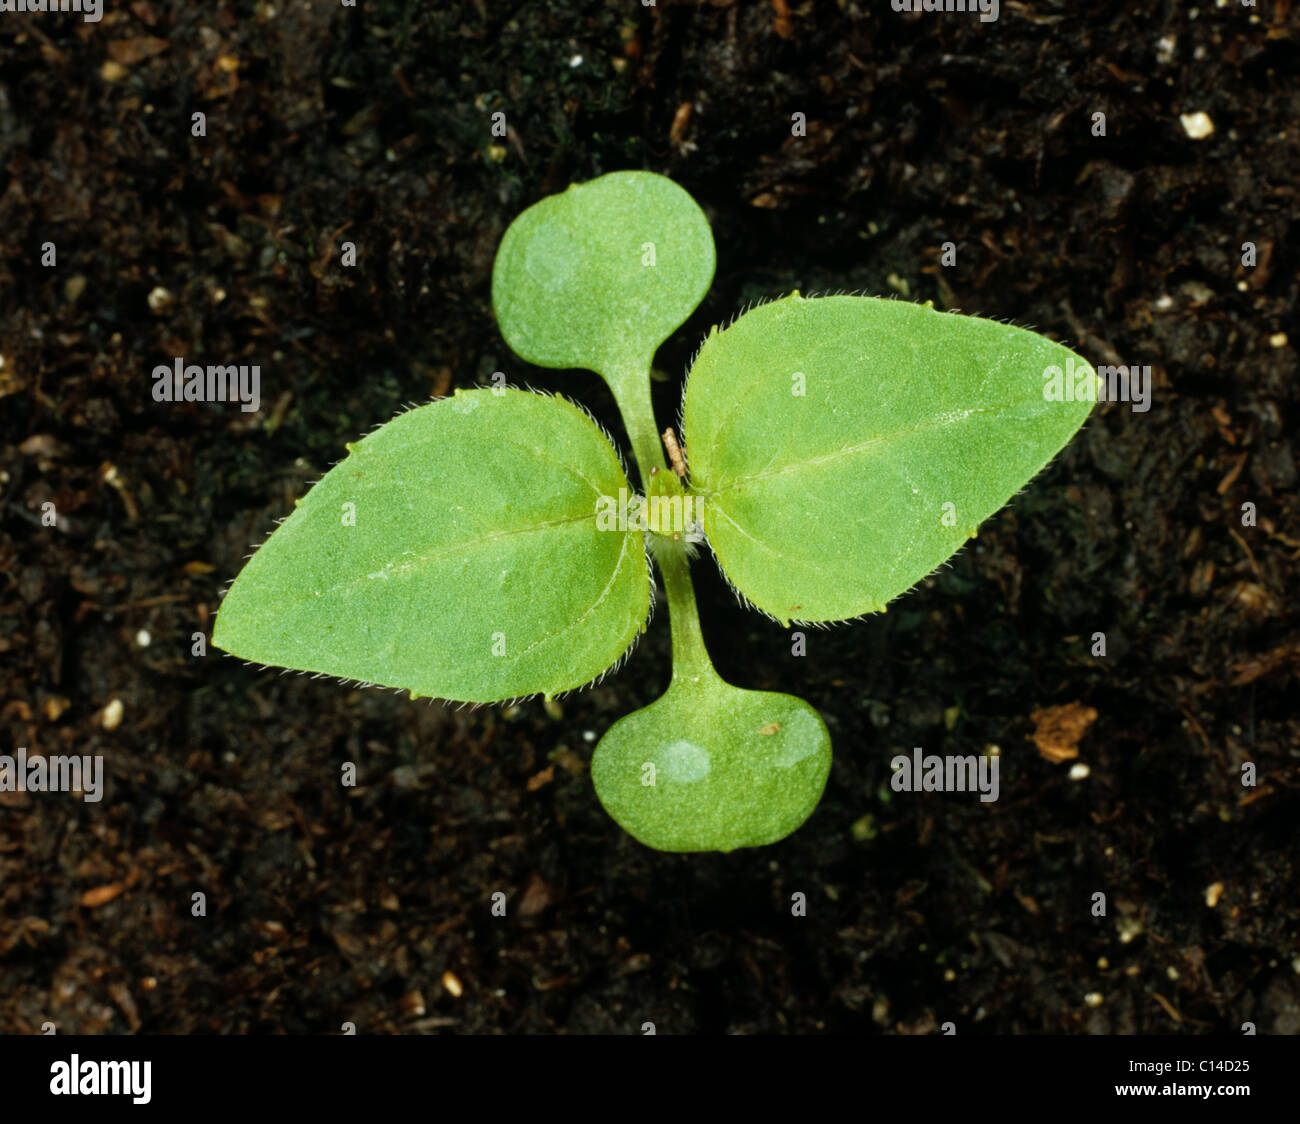 Gallant Soldier (Galinsoga parviflora) seedling cotyledons & first true leaves Stock Photo